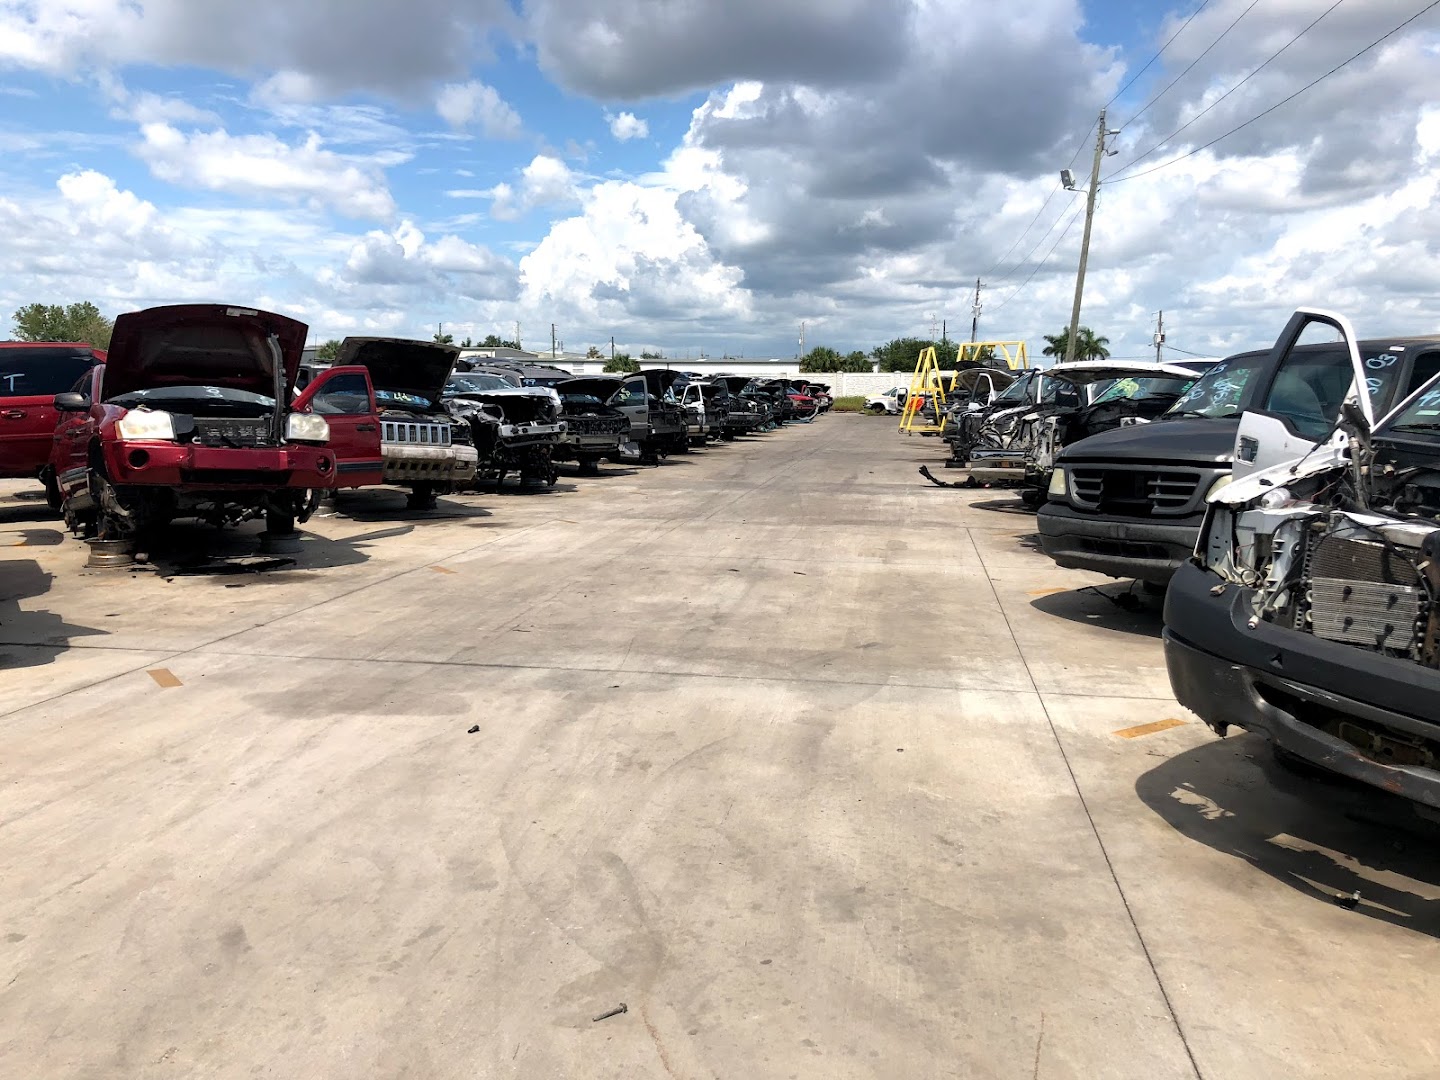 Salvage yard In Fort Myers FL 